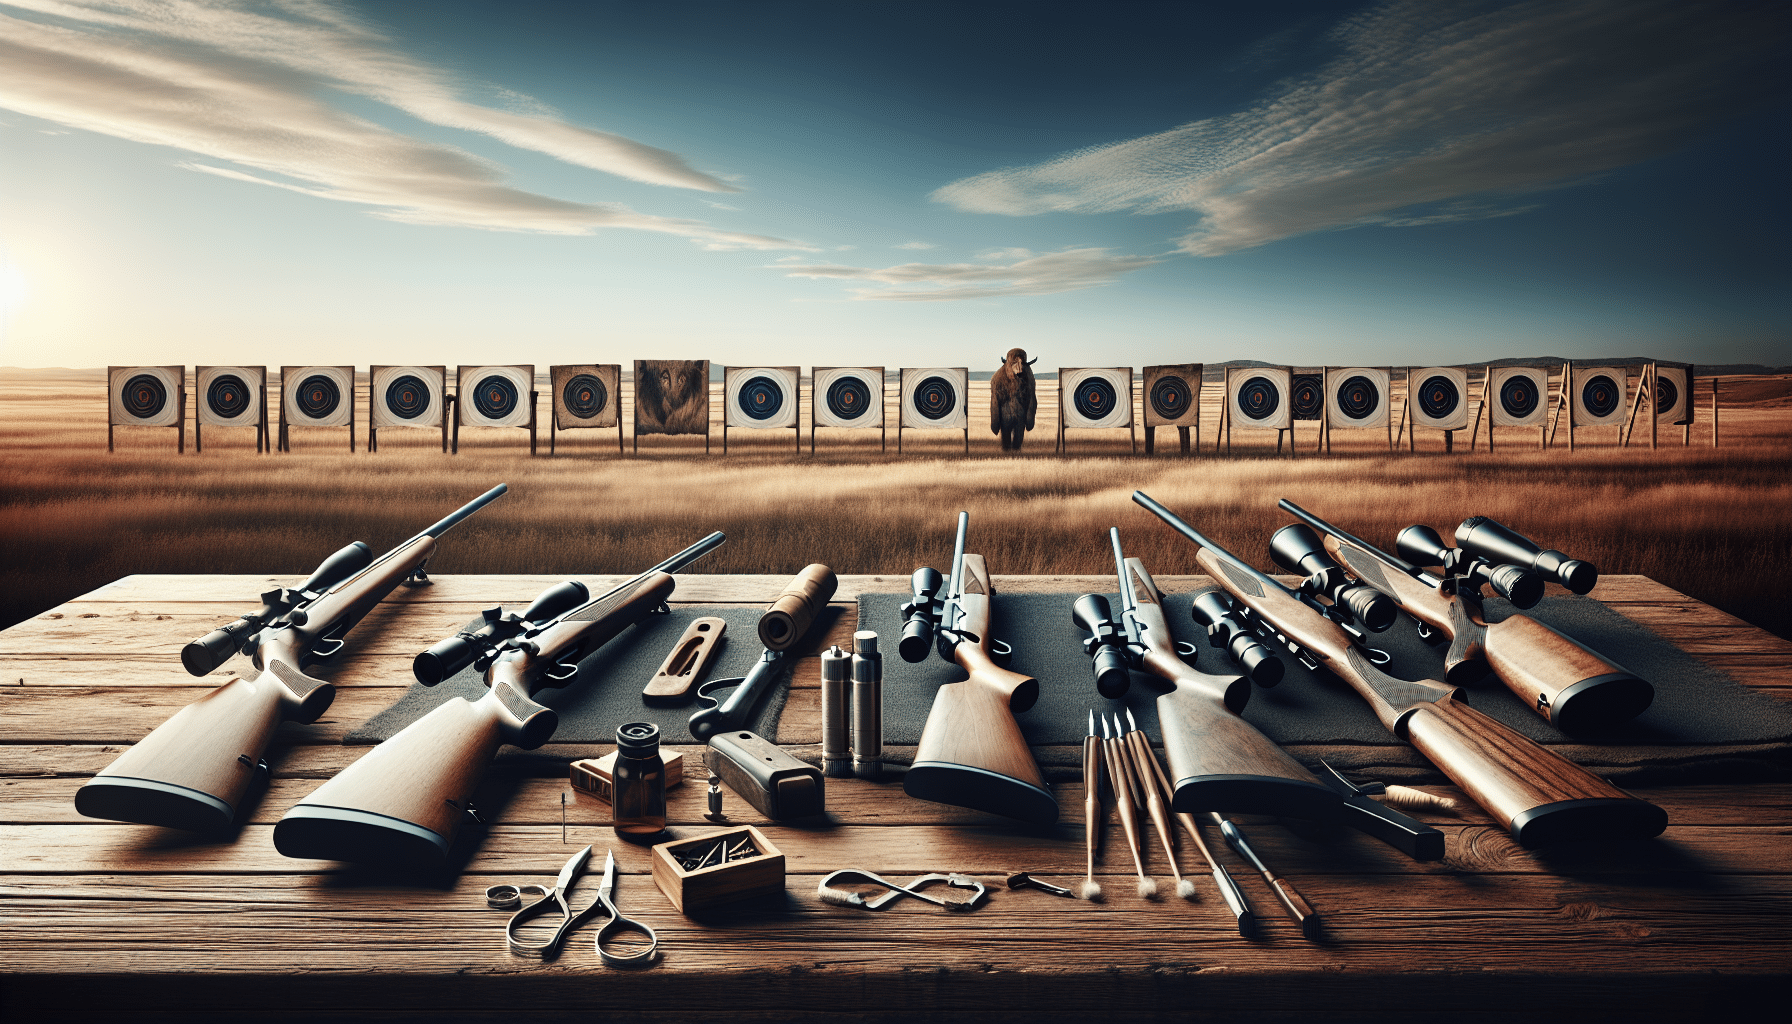 A serene and vast open plain under a clear sky. On the left, a selection of unbranded hunting rifles, varying in models and sizes, leaning against a rustic wooden table. On the table, tools for maintaining and adjusting the rifles such as scopes, bipods, and cleaning brushes. On the right, the targets set at different distances to illustrate long range, with focus on clear evidence of precision shots. The overall atmosphere exudes the thrill and challenge of long-range hunting in open plains, without any mention of brand names, logos or people in the scene.